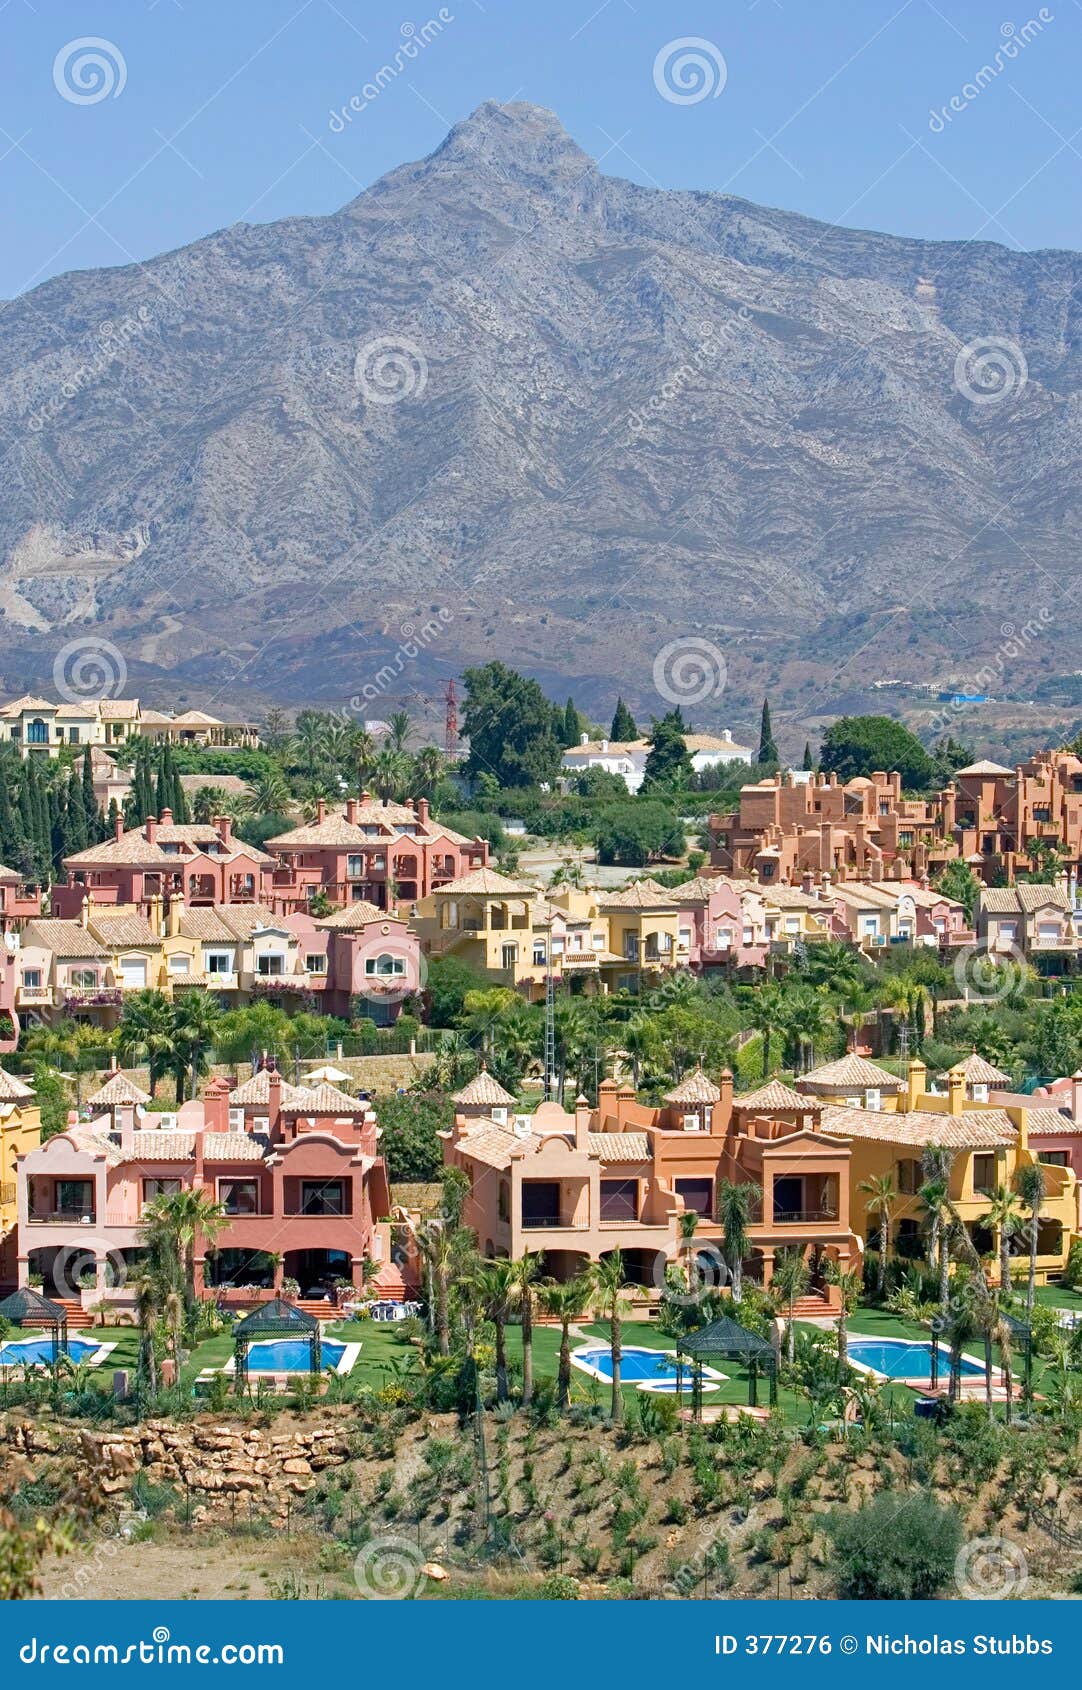 expensive apartments and townhouses in nueva andalucia in spain